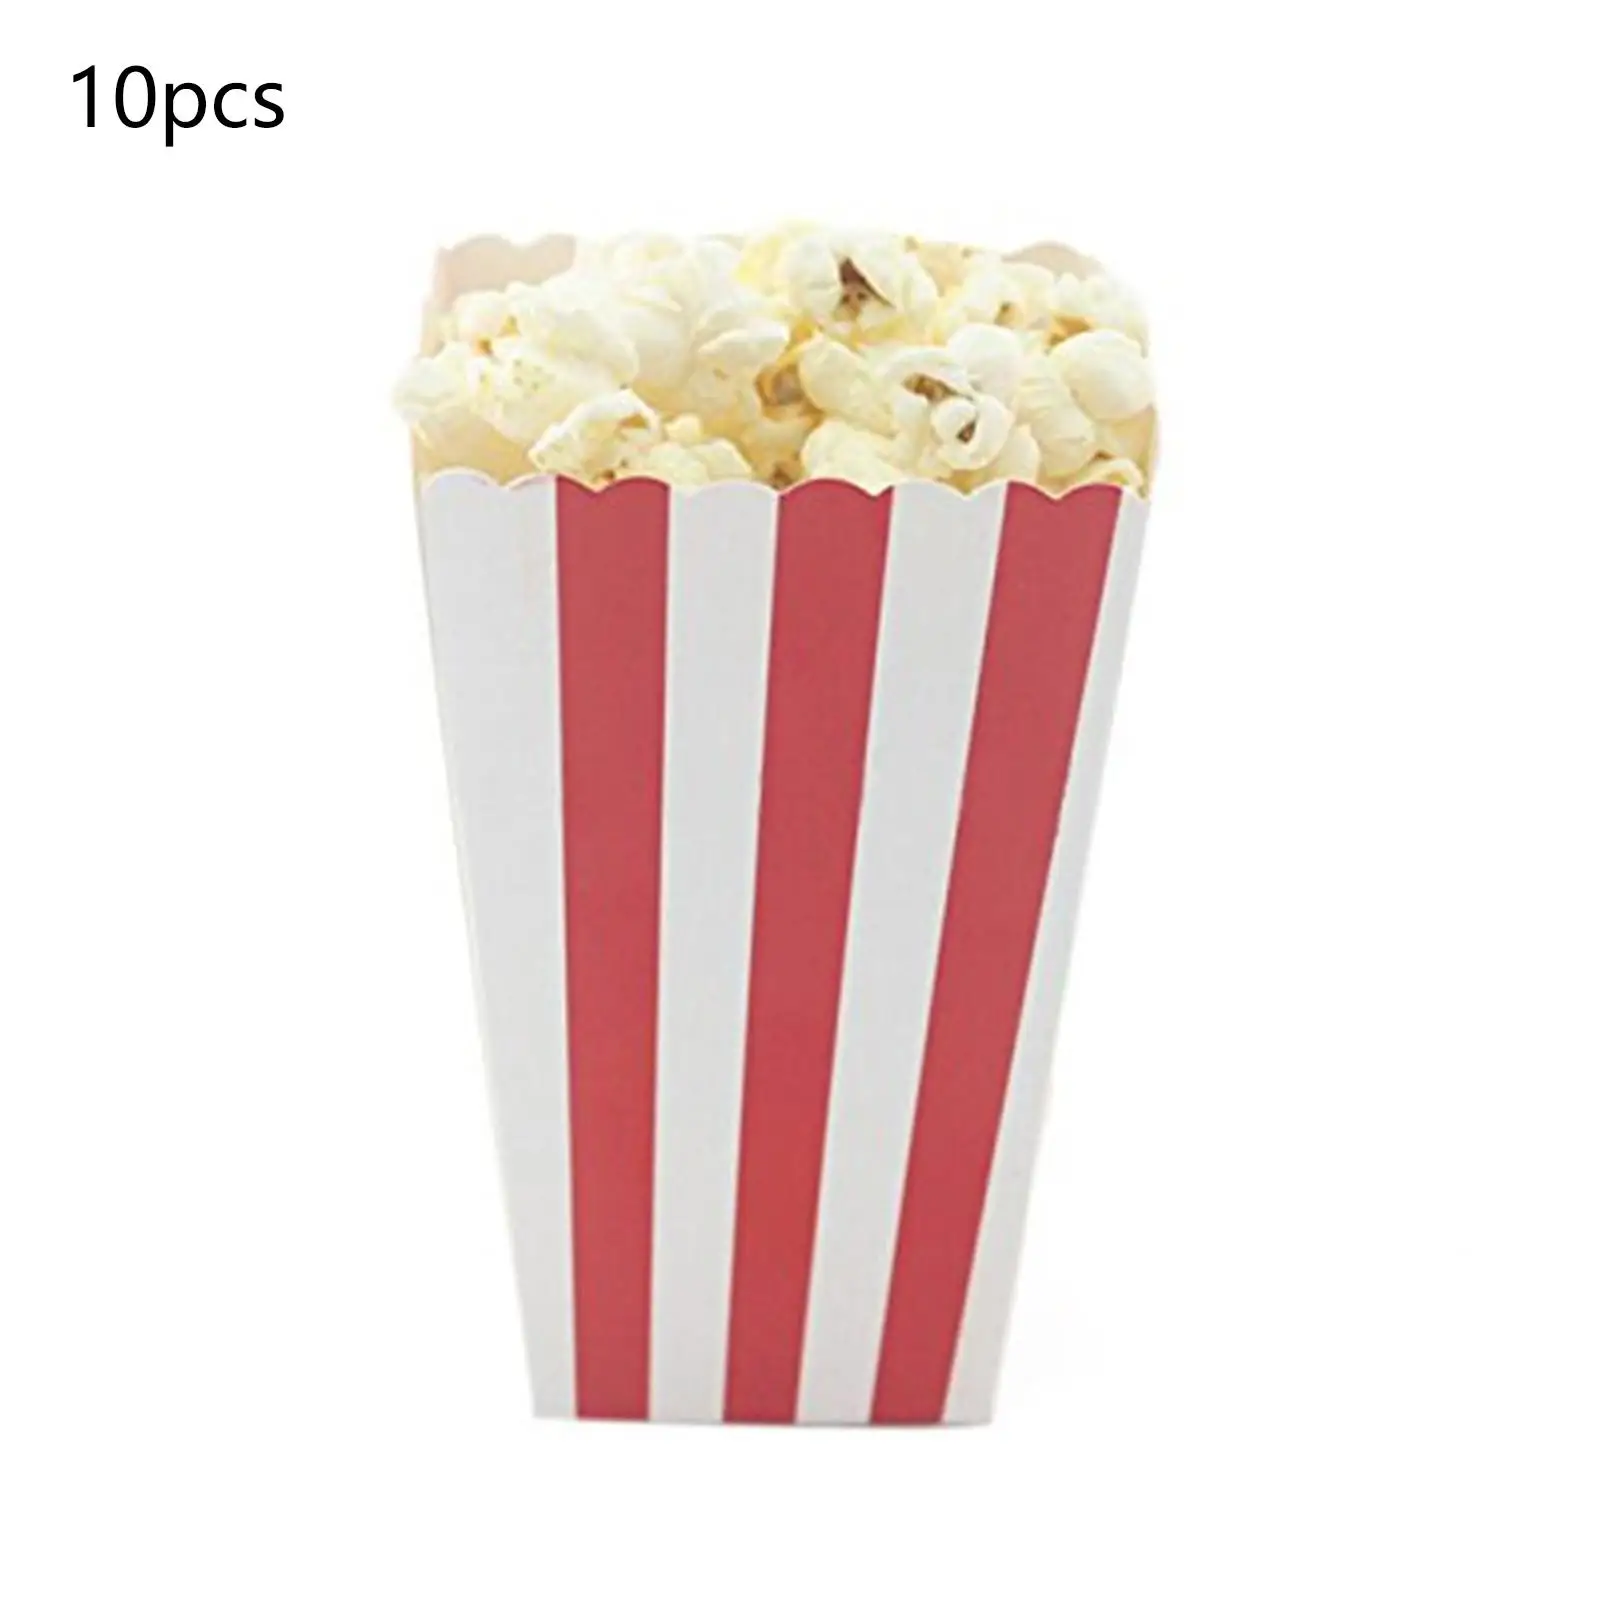 12pcs Popcorn Boxes Paper Gift Candy Bags Containers for Family Movie Night Theaters Festivals Party Wedding Supplies